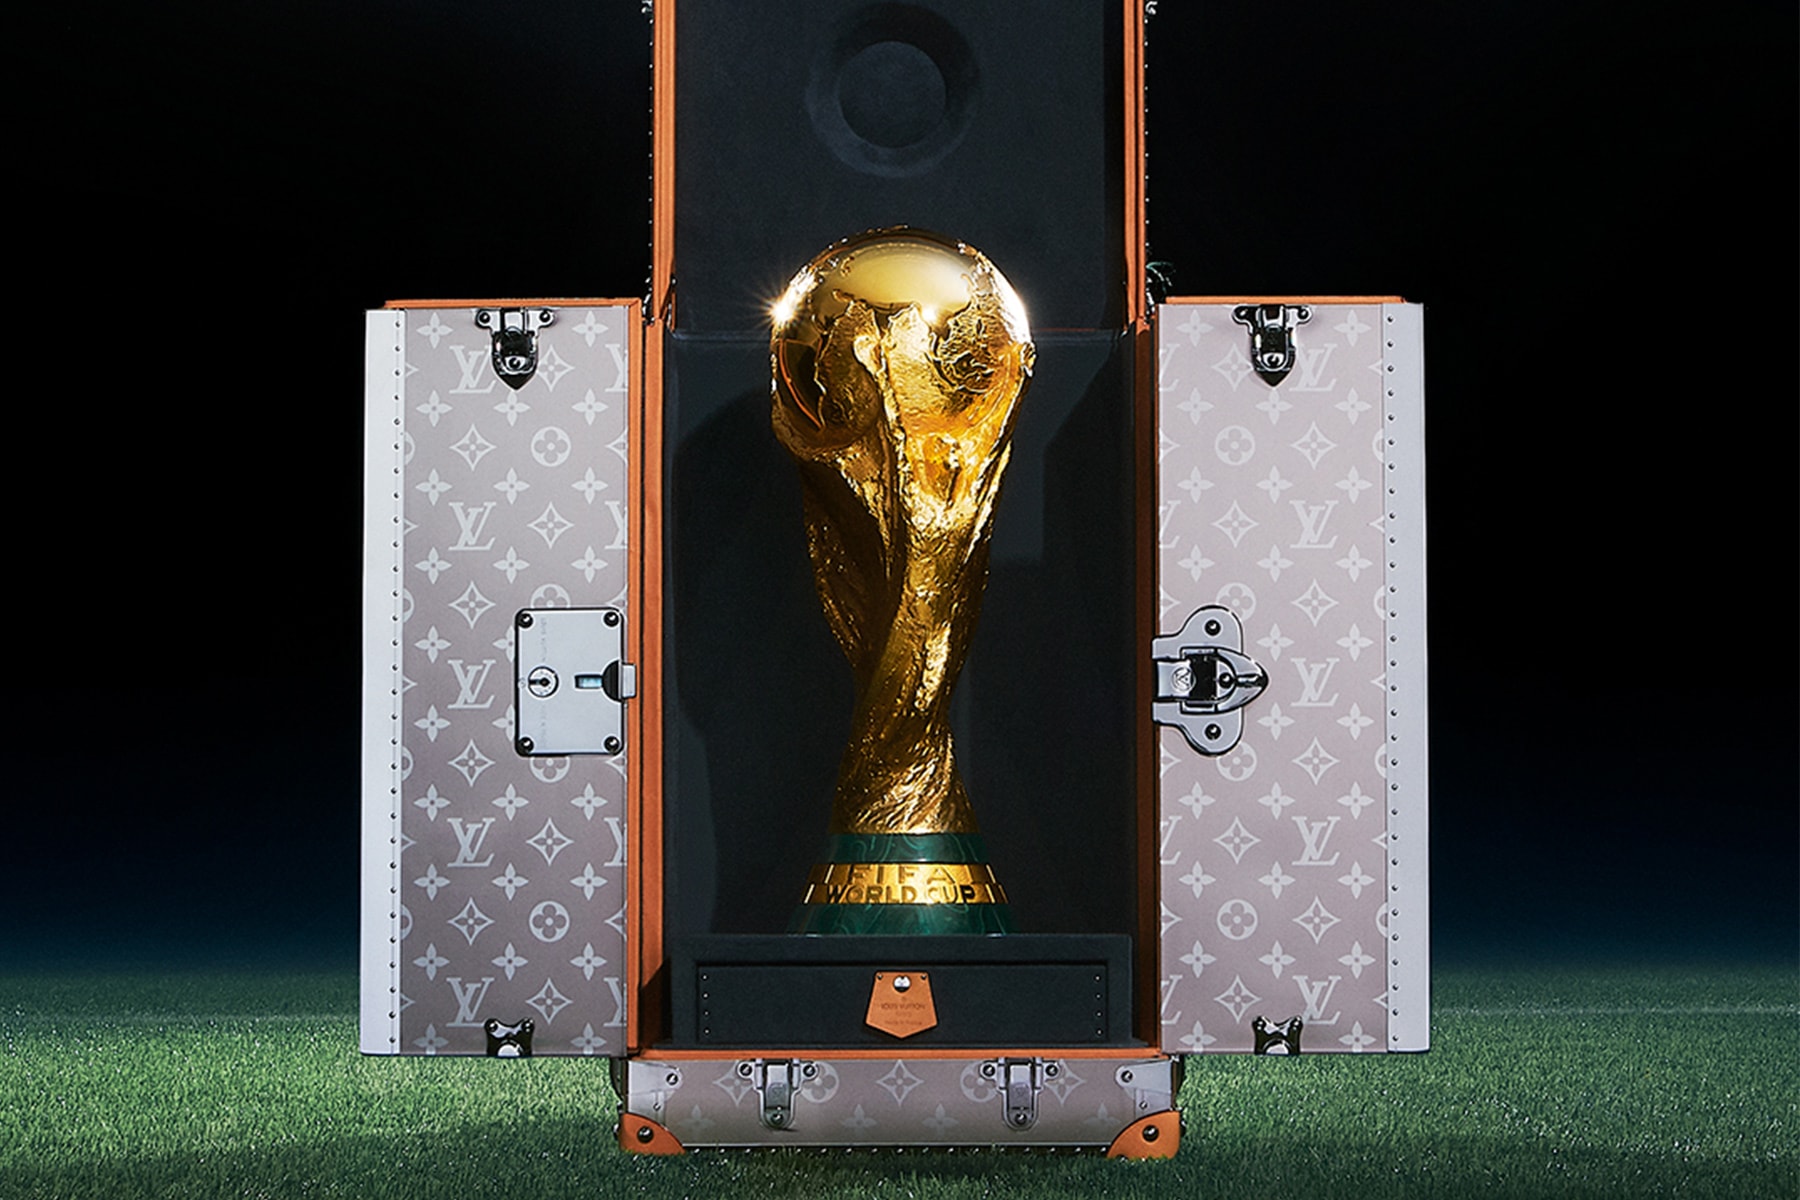 Louis Vuitton on X: Victory Travels in Louis Vuitton. #DeepikaPadukone and  #IkerCasillas presented the ultimate prize in football in a bespoke # LouisVuitton trophy trunk at the #FIFAWorldCup2022 Final. Learn more about  the